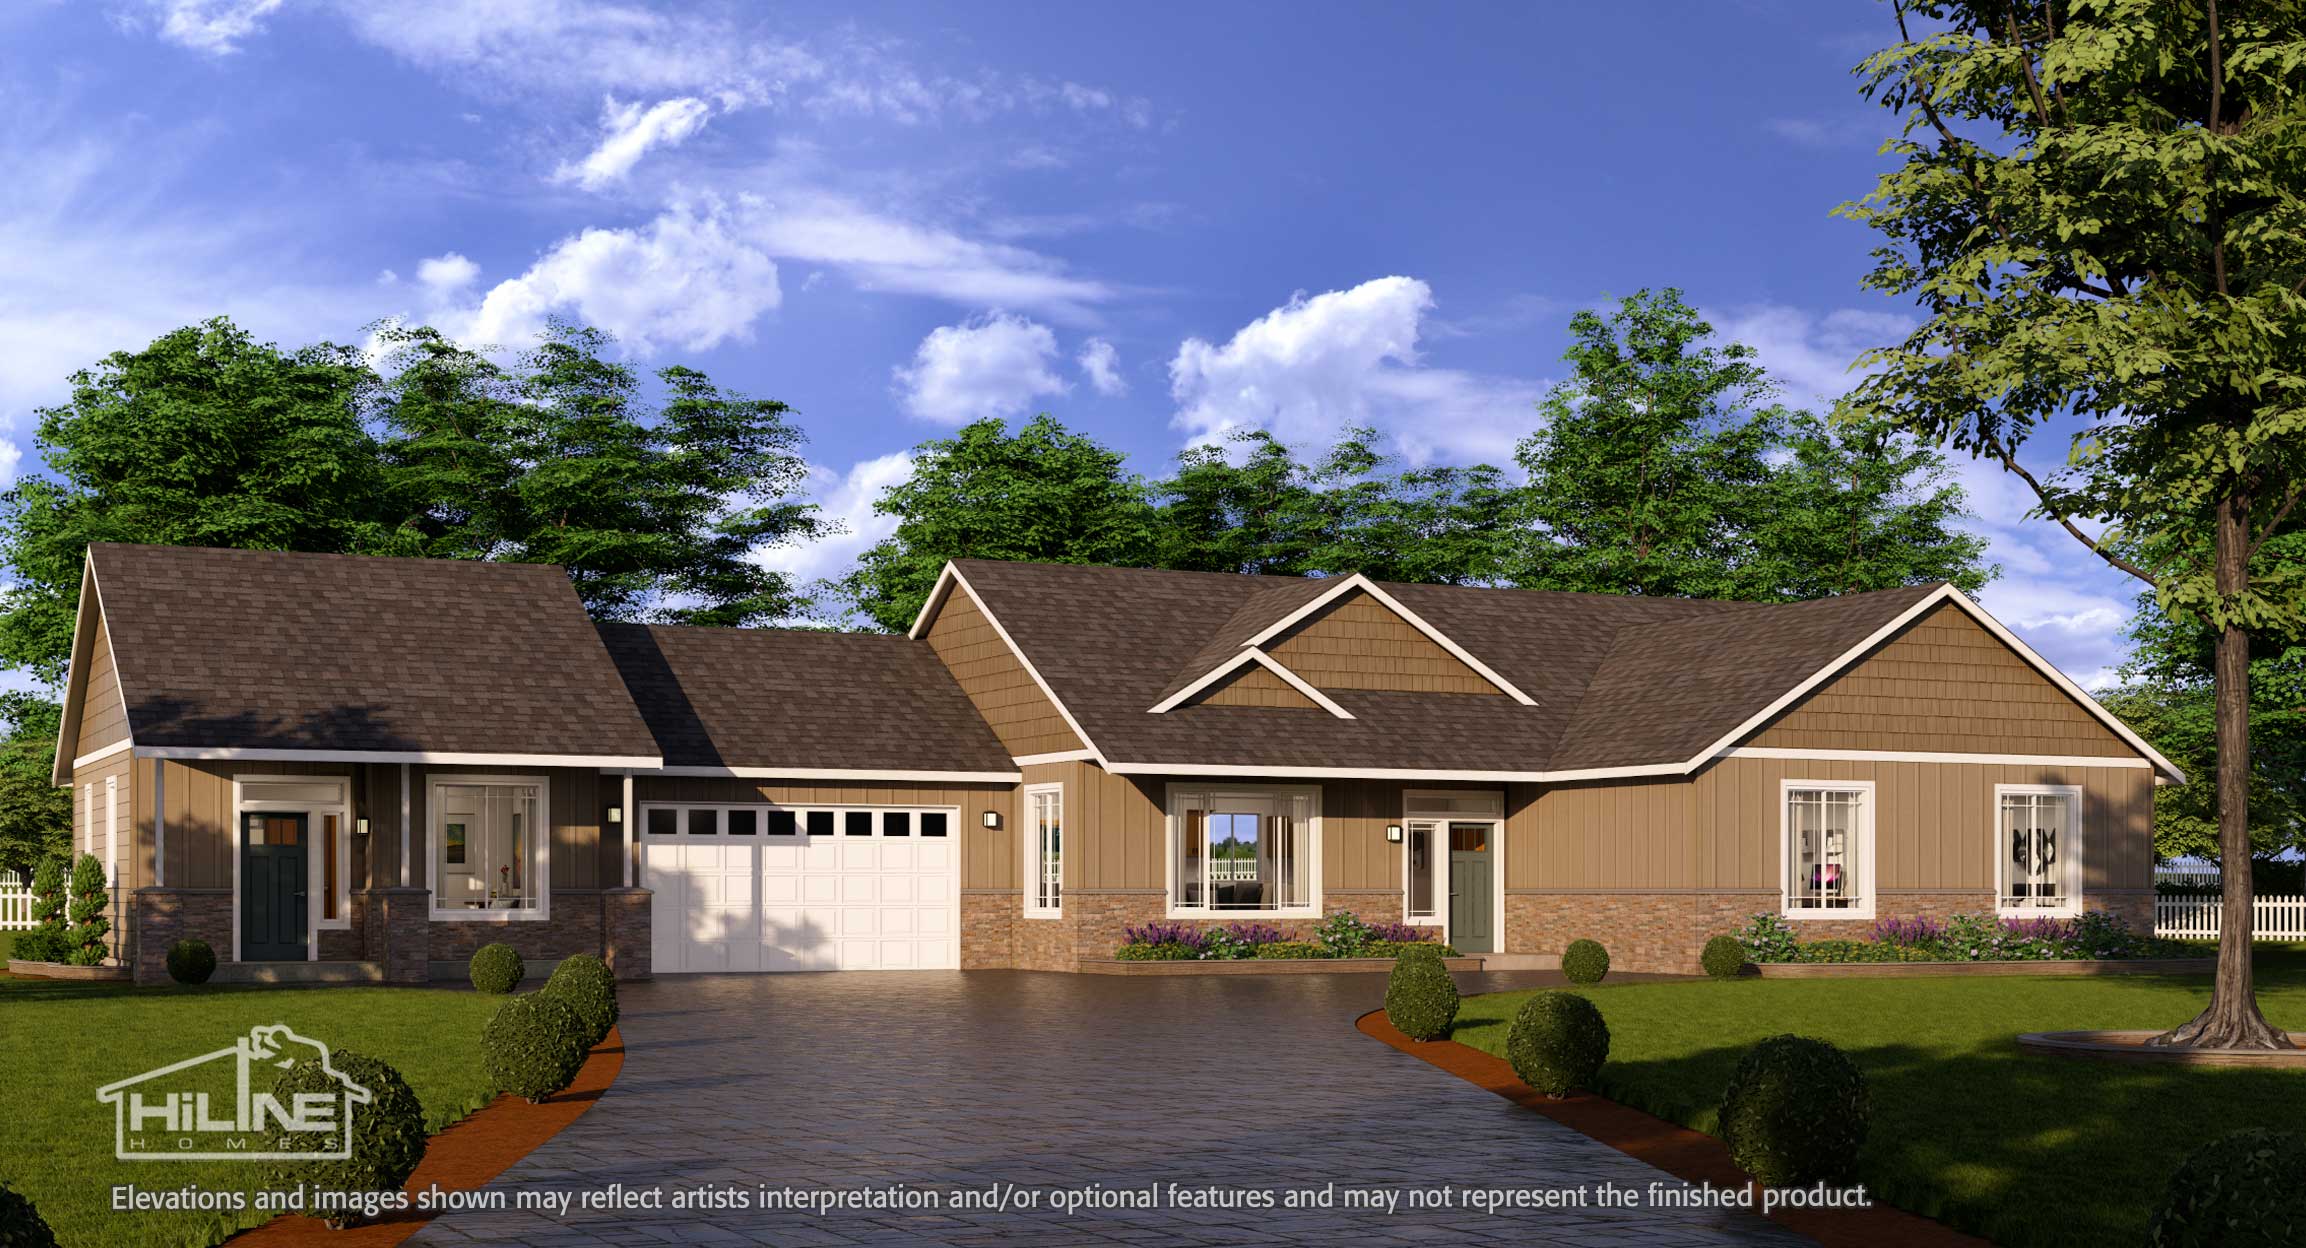 Image of HiLine Homes Plan 2112 with attached Plan 500B.